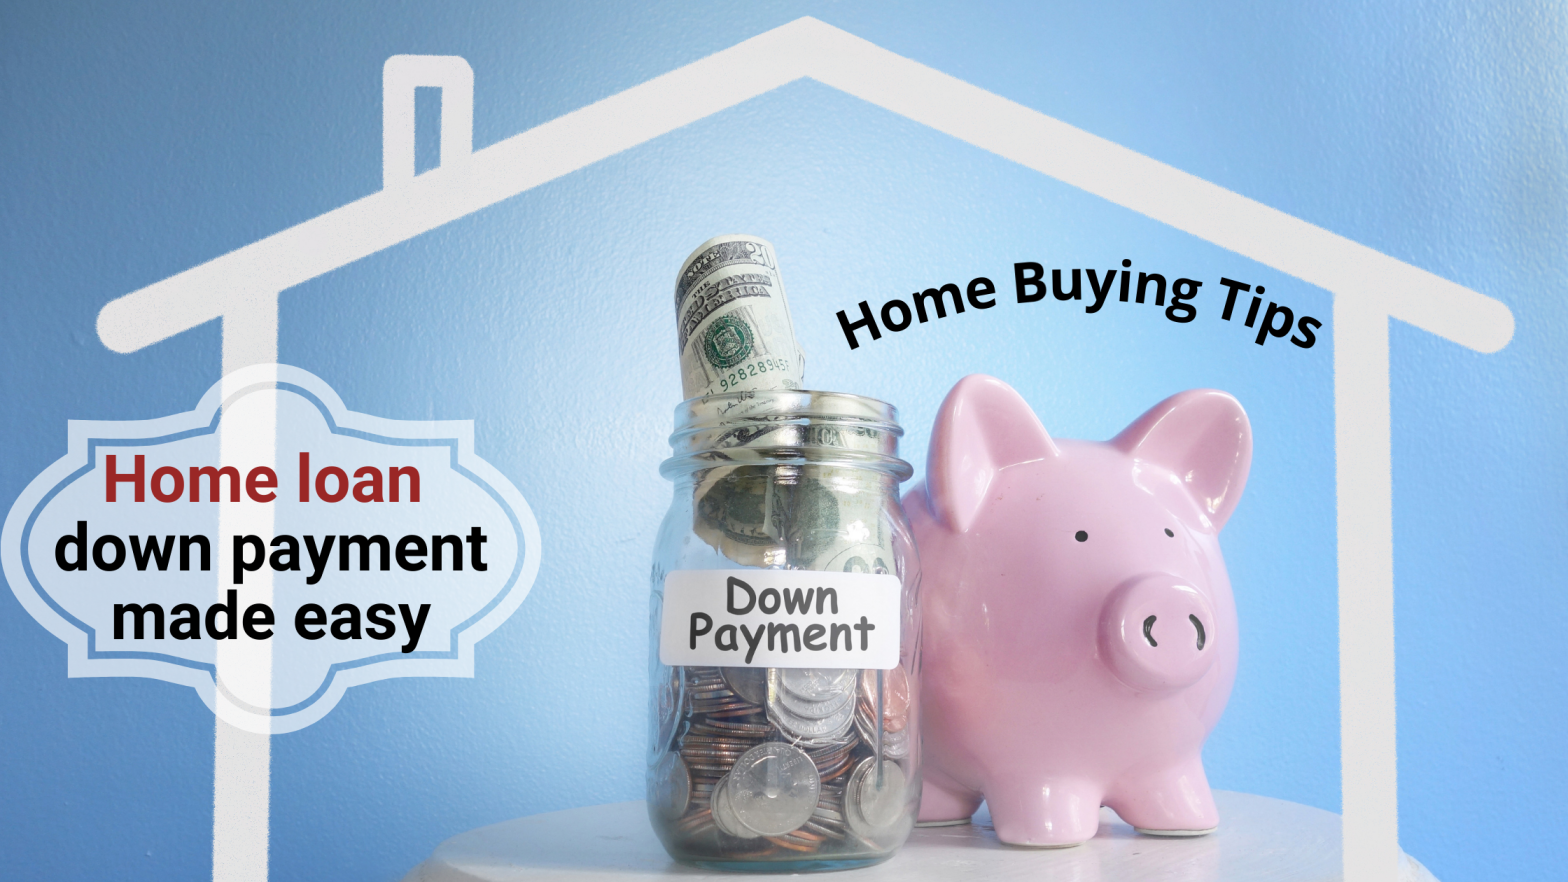 Home loan down payment made easy